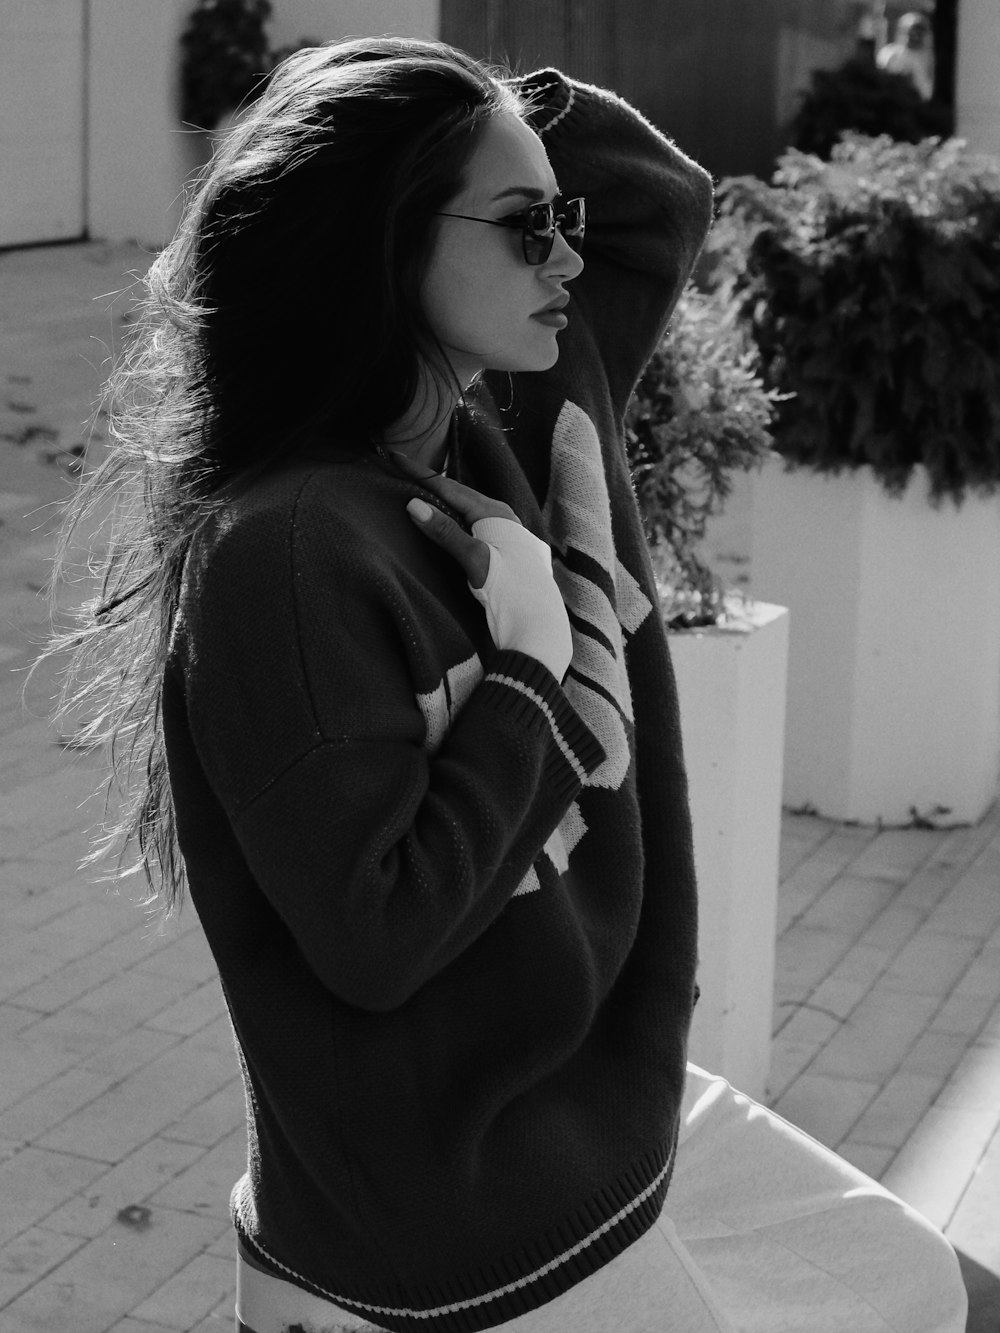 a woman in a sweater and sunglasses is standing on a sidewalk